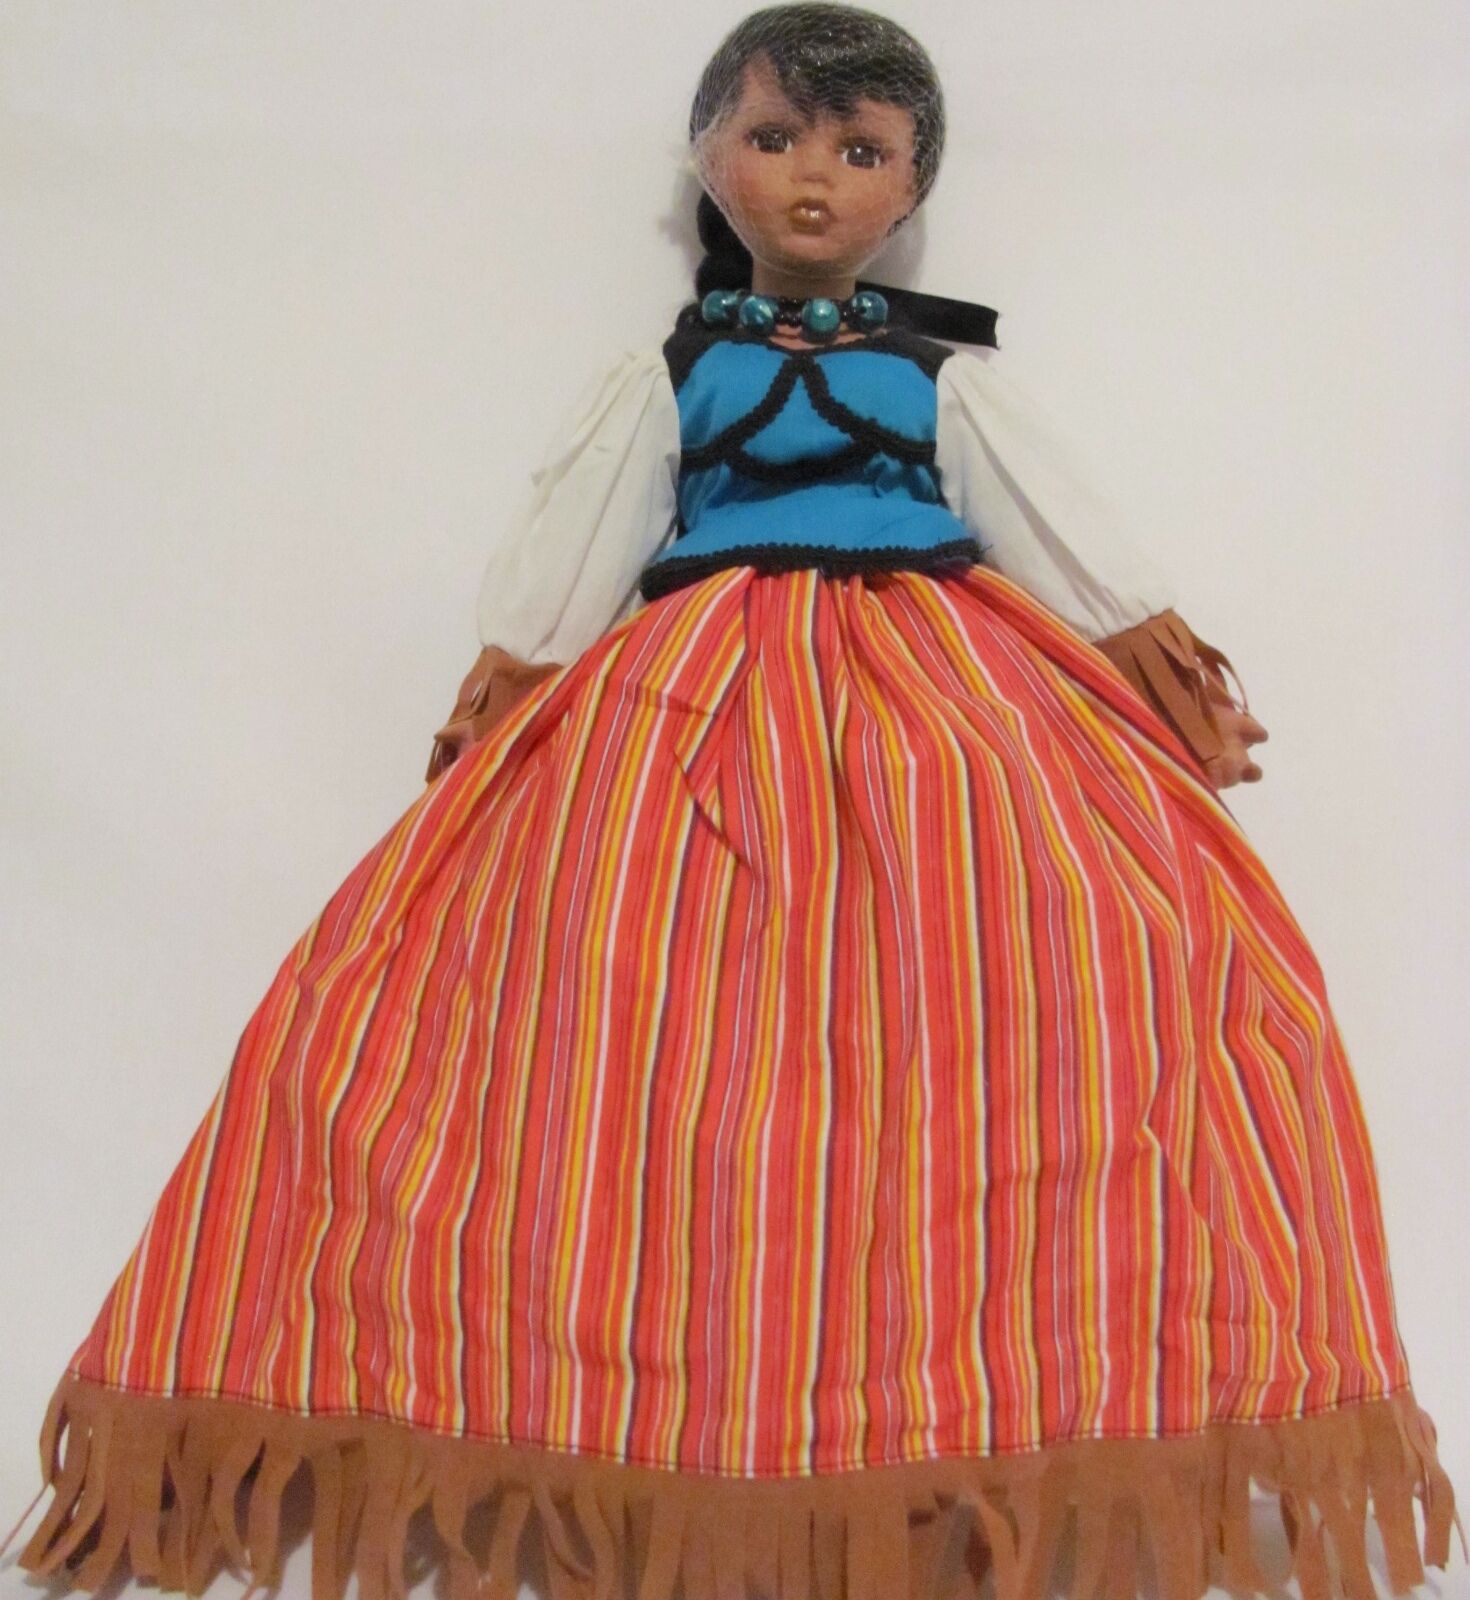 Native American Porcelain Doll 17" Tall Braided Olive Skin Girl Collect Decor